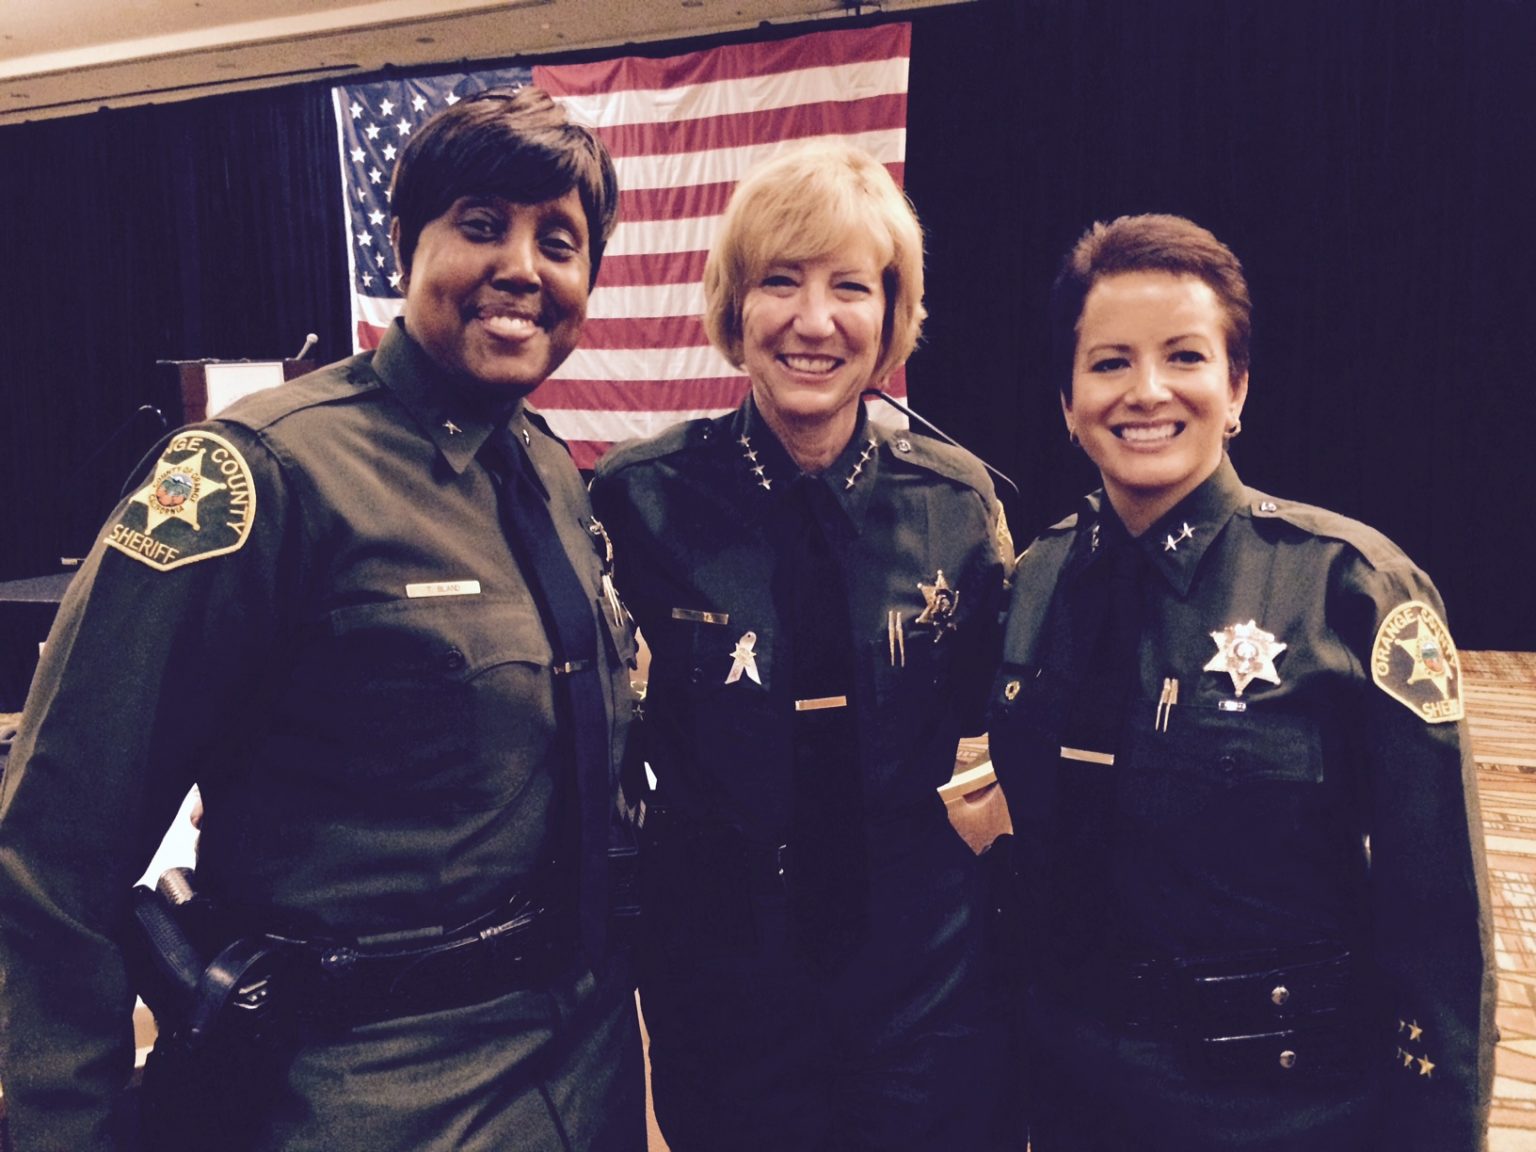 Sheriff Hutchens inspires women to be law enforcement leaders Behind